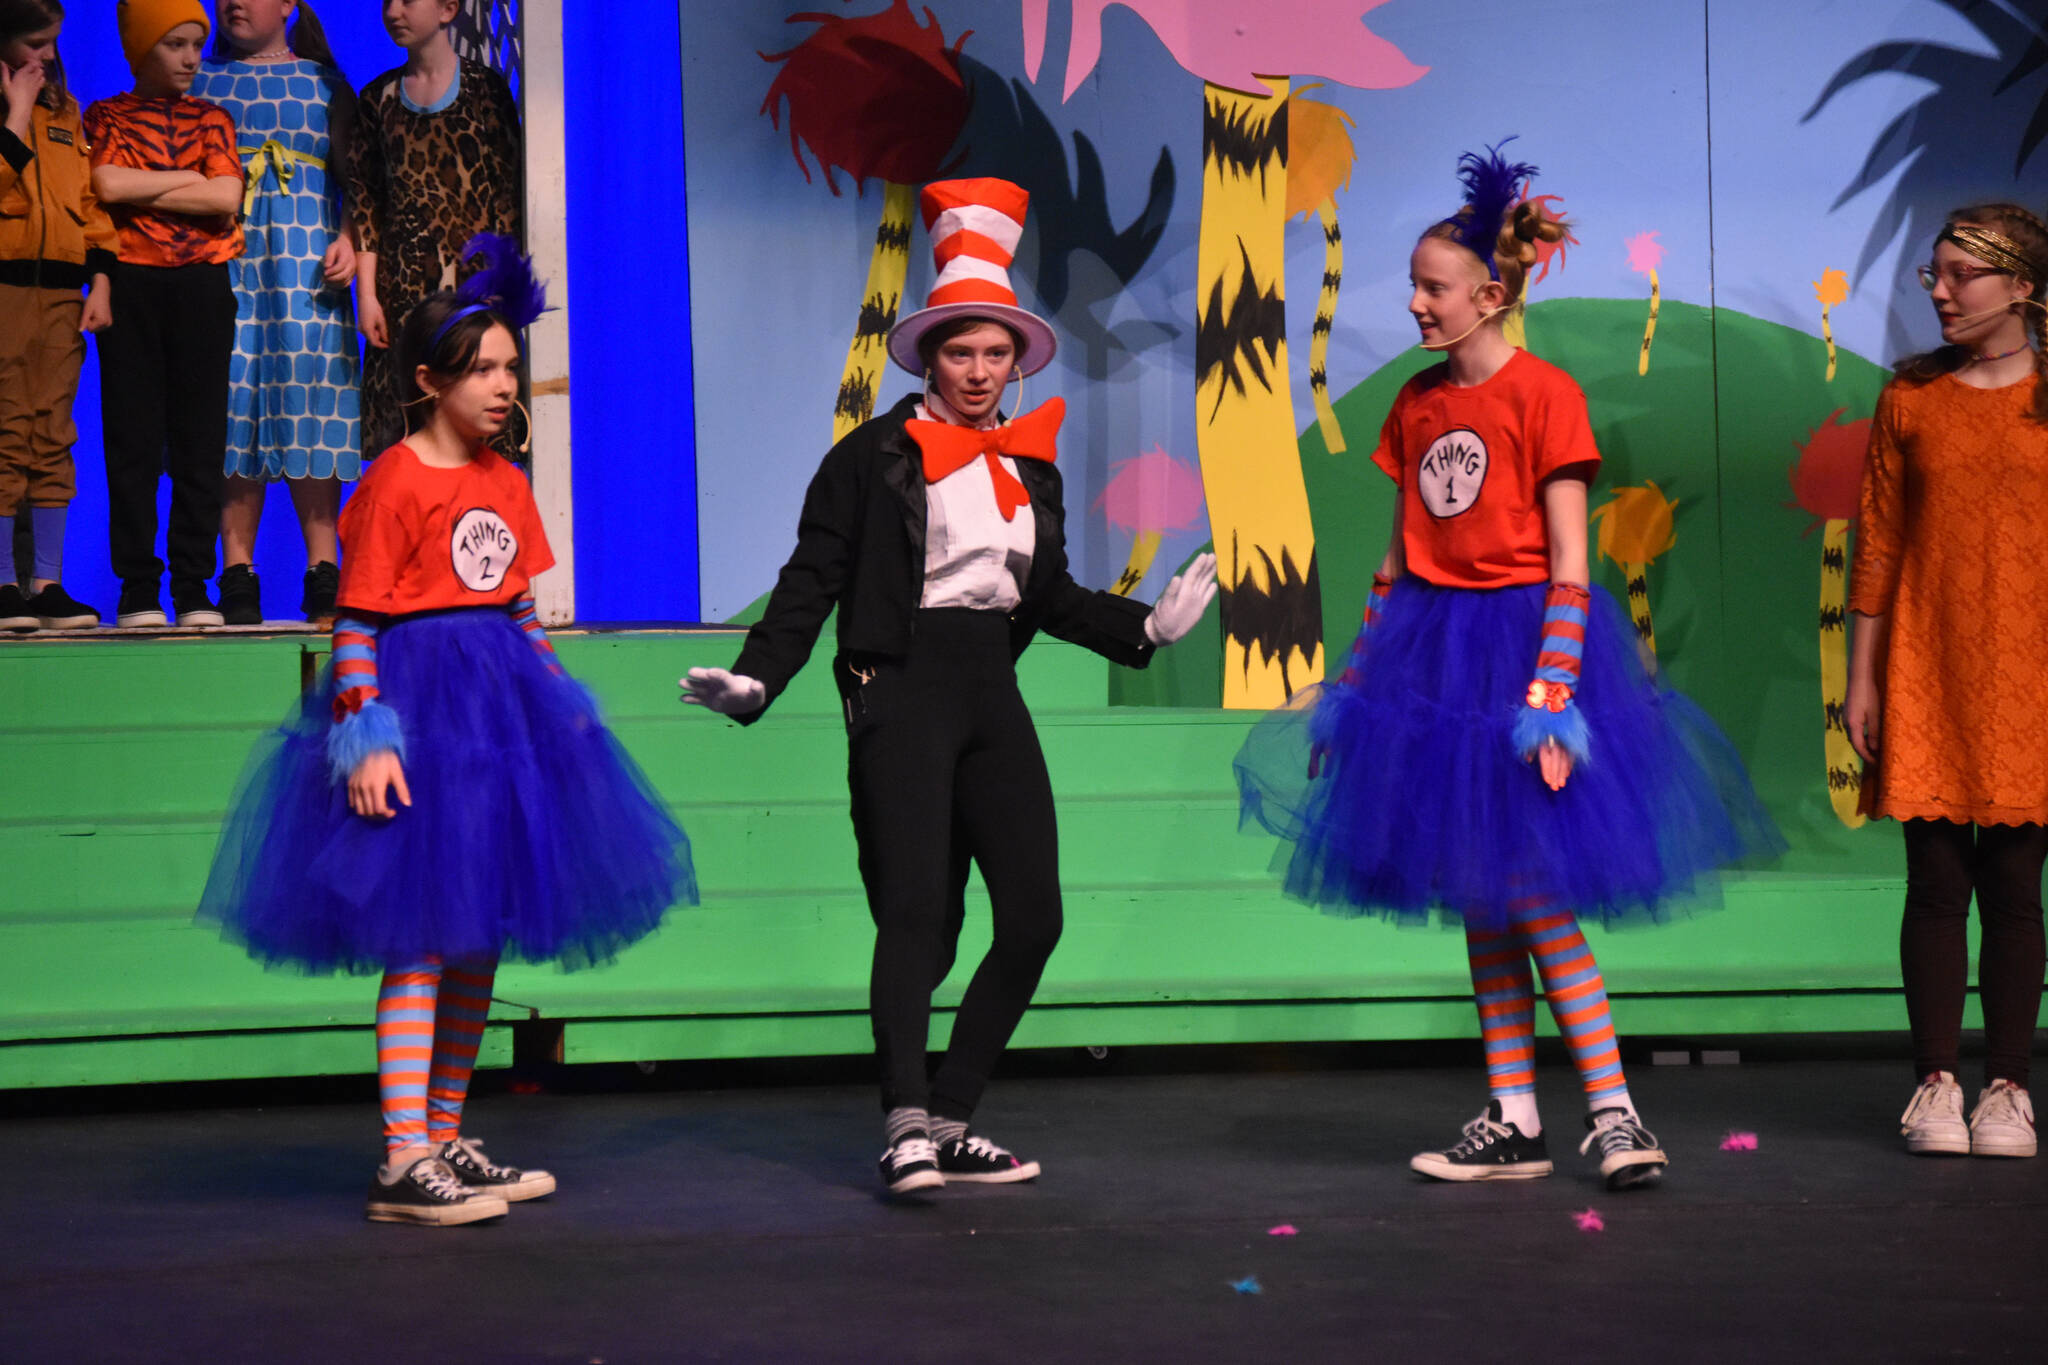 The cast of Triumvirate Theatre’s production of “Seussical,” portraying The Cat in the Hat, Thing 1 and Thing 2 rehearse on Wednesday, Feb. 8, 2023, in the Renee C. Henderson Auditorium at Kenai Central High School in Kenai, Alaska. (Jake Dye/Peninsula Clarion)